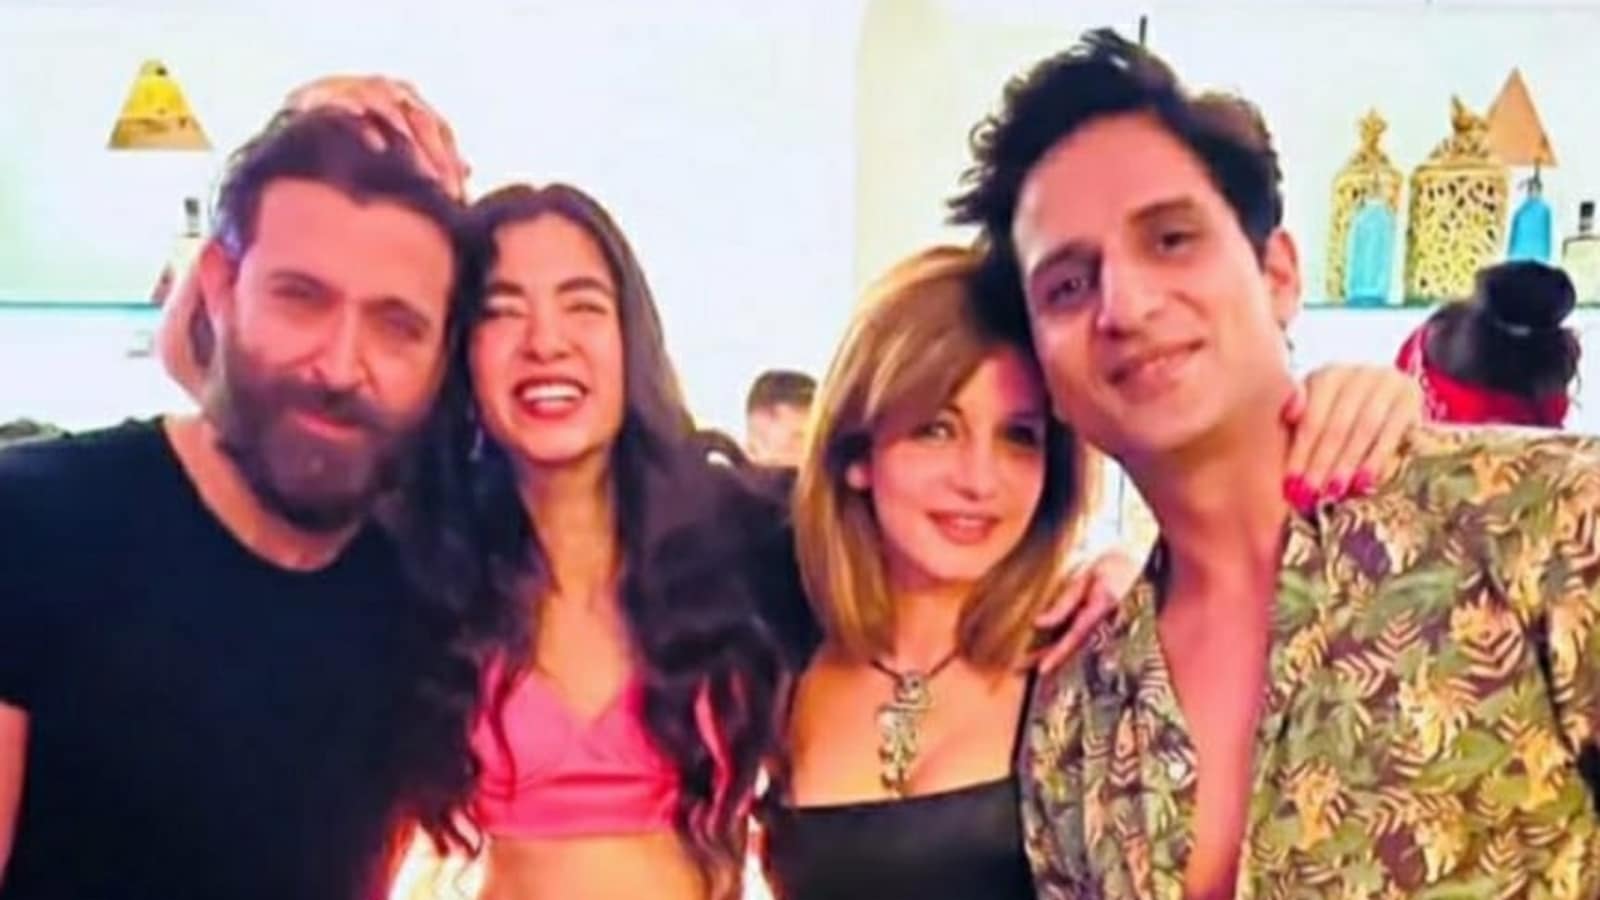 Hrithik Roshan, Saba Azad pose with Sussanne Khan and her boyfriend at Goa  bash - Hindustan Times